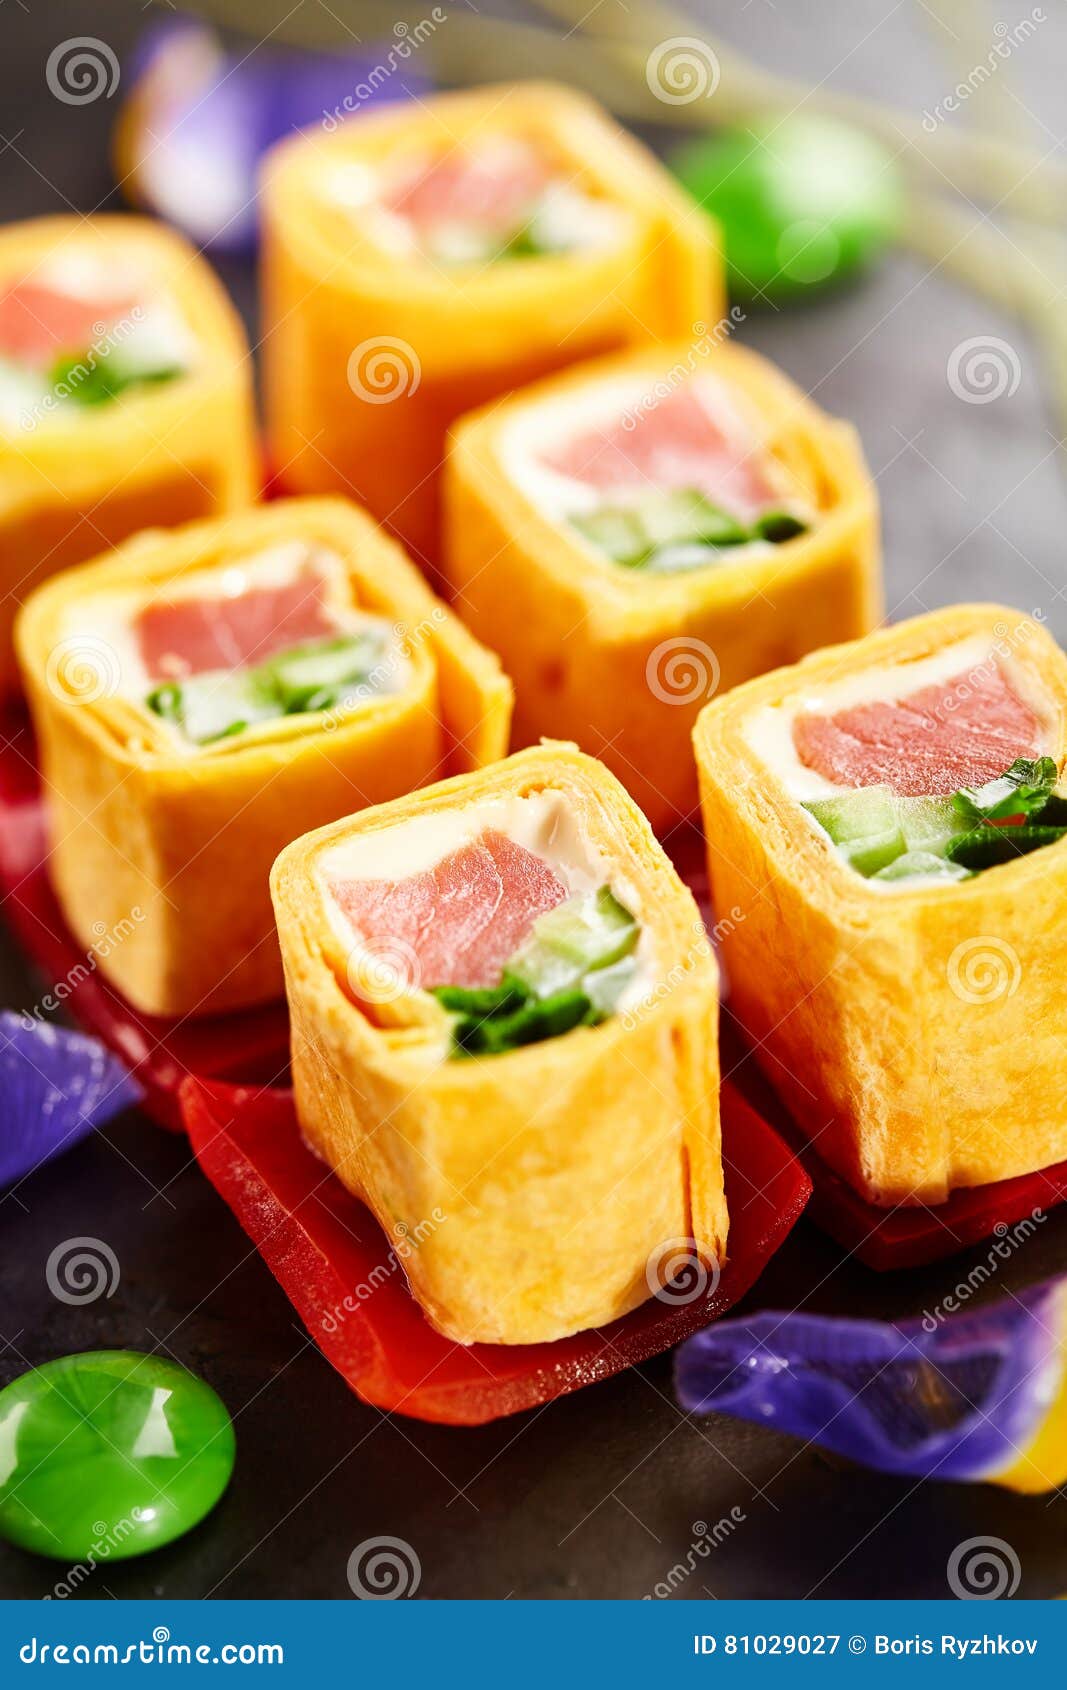 Maki Sushi Roll stock image. Image of lettuce, mexican - 81029027